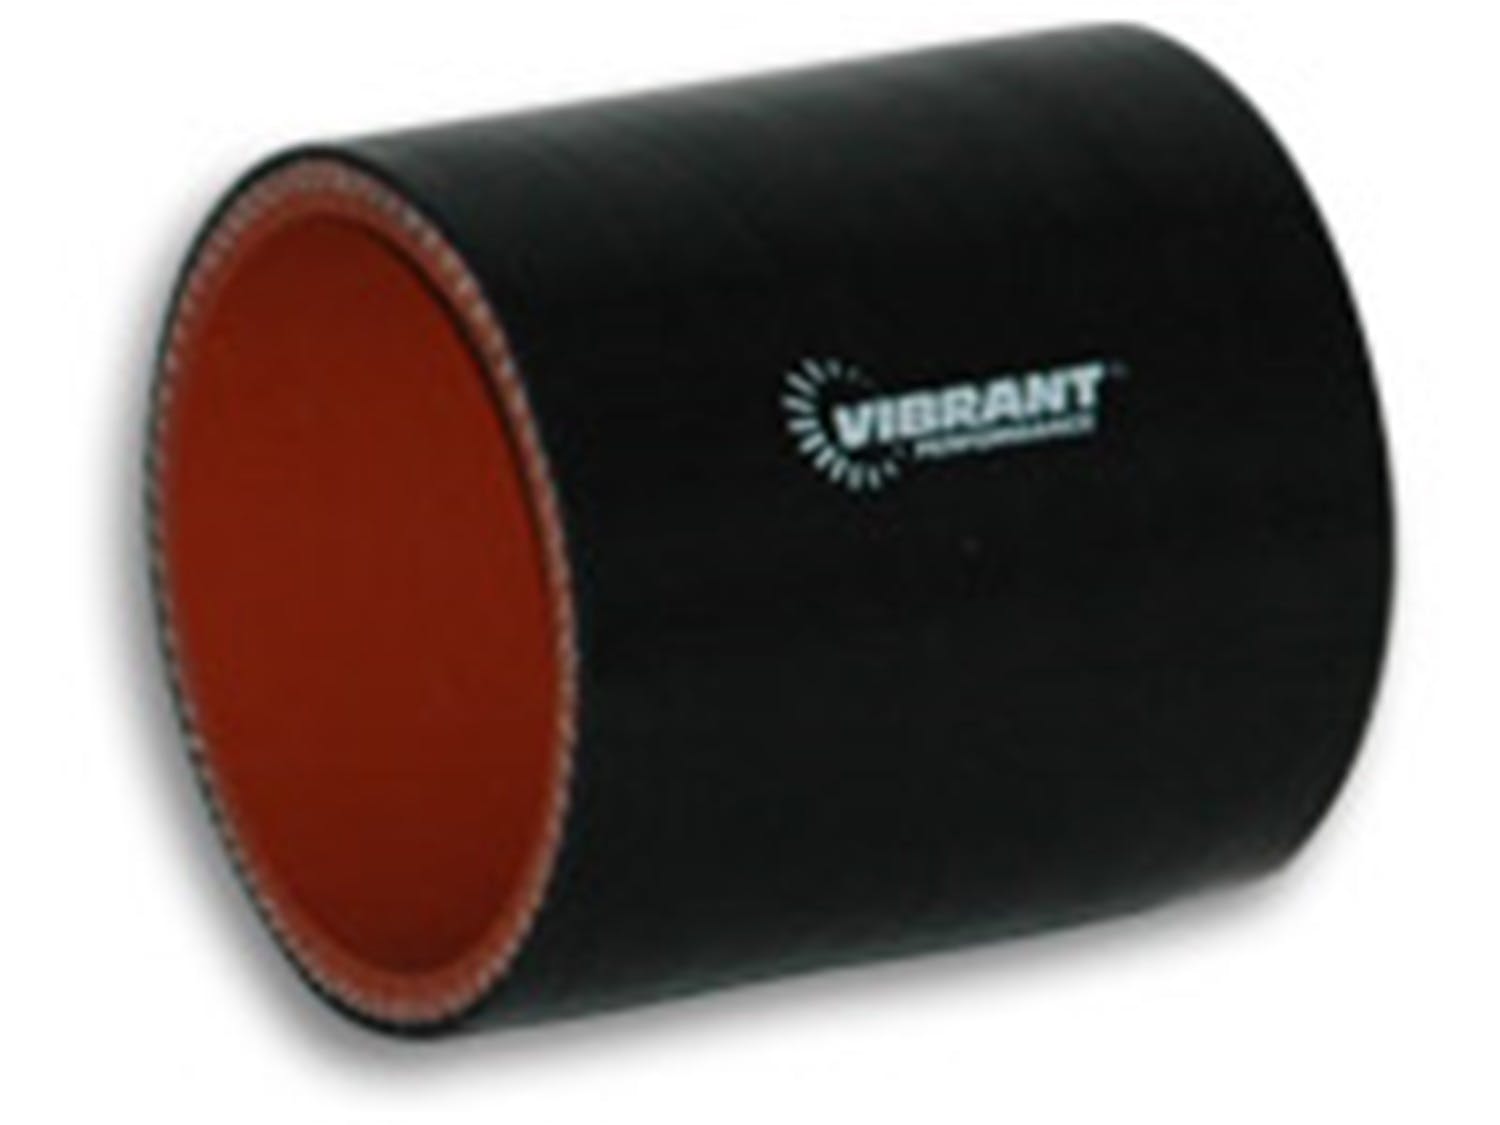 Vibrant Performance 2700 4 Ply Silicone Sleeve, 1 inch I.D. x 3 inch Long - Black